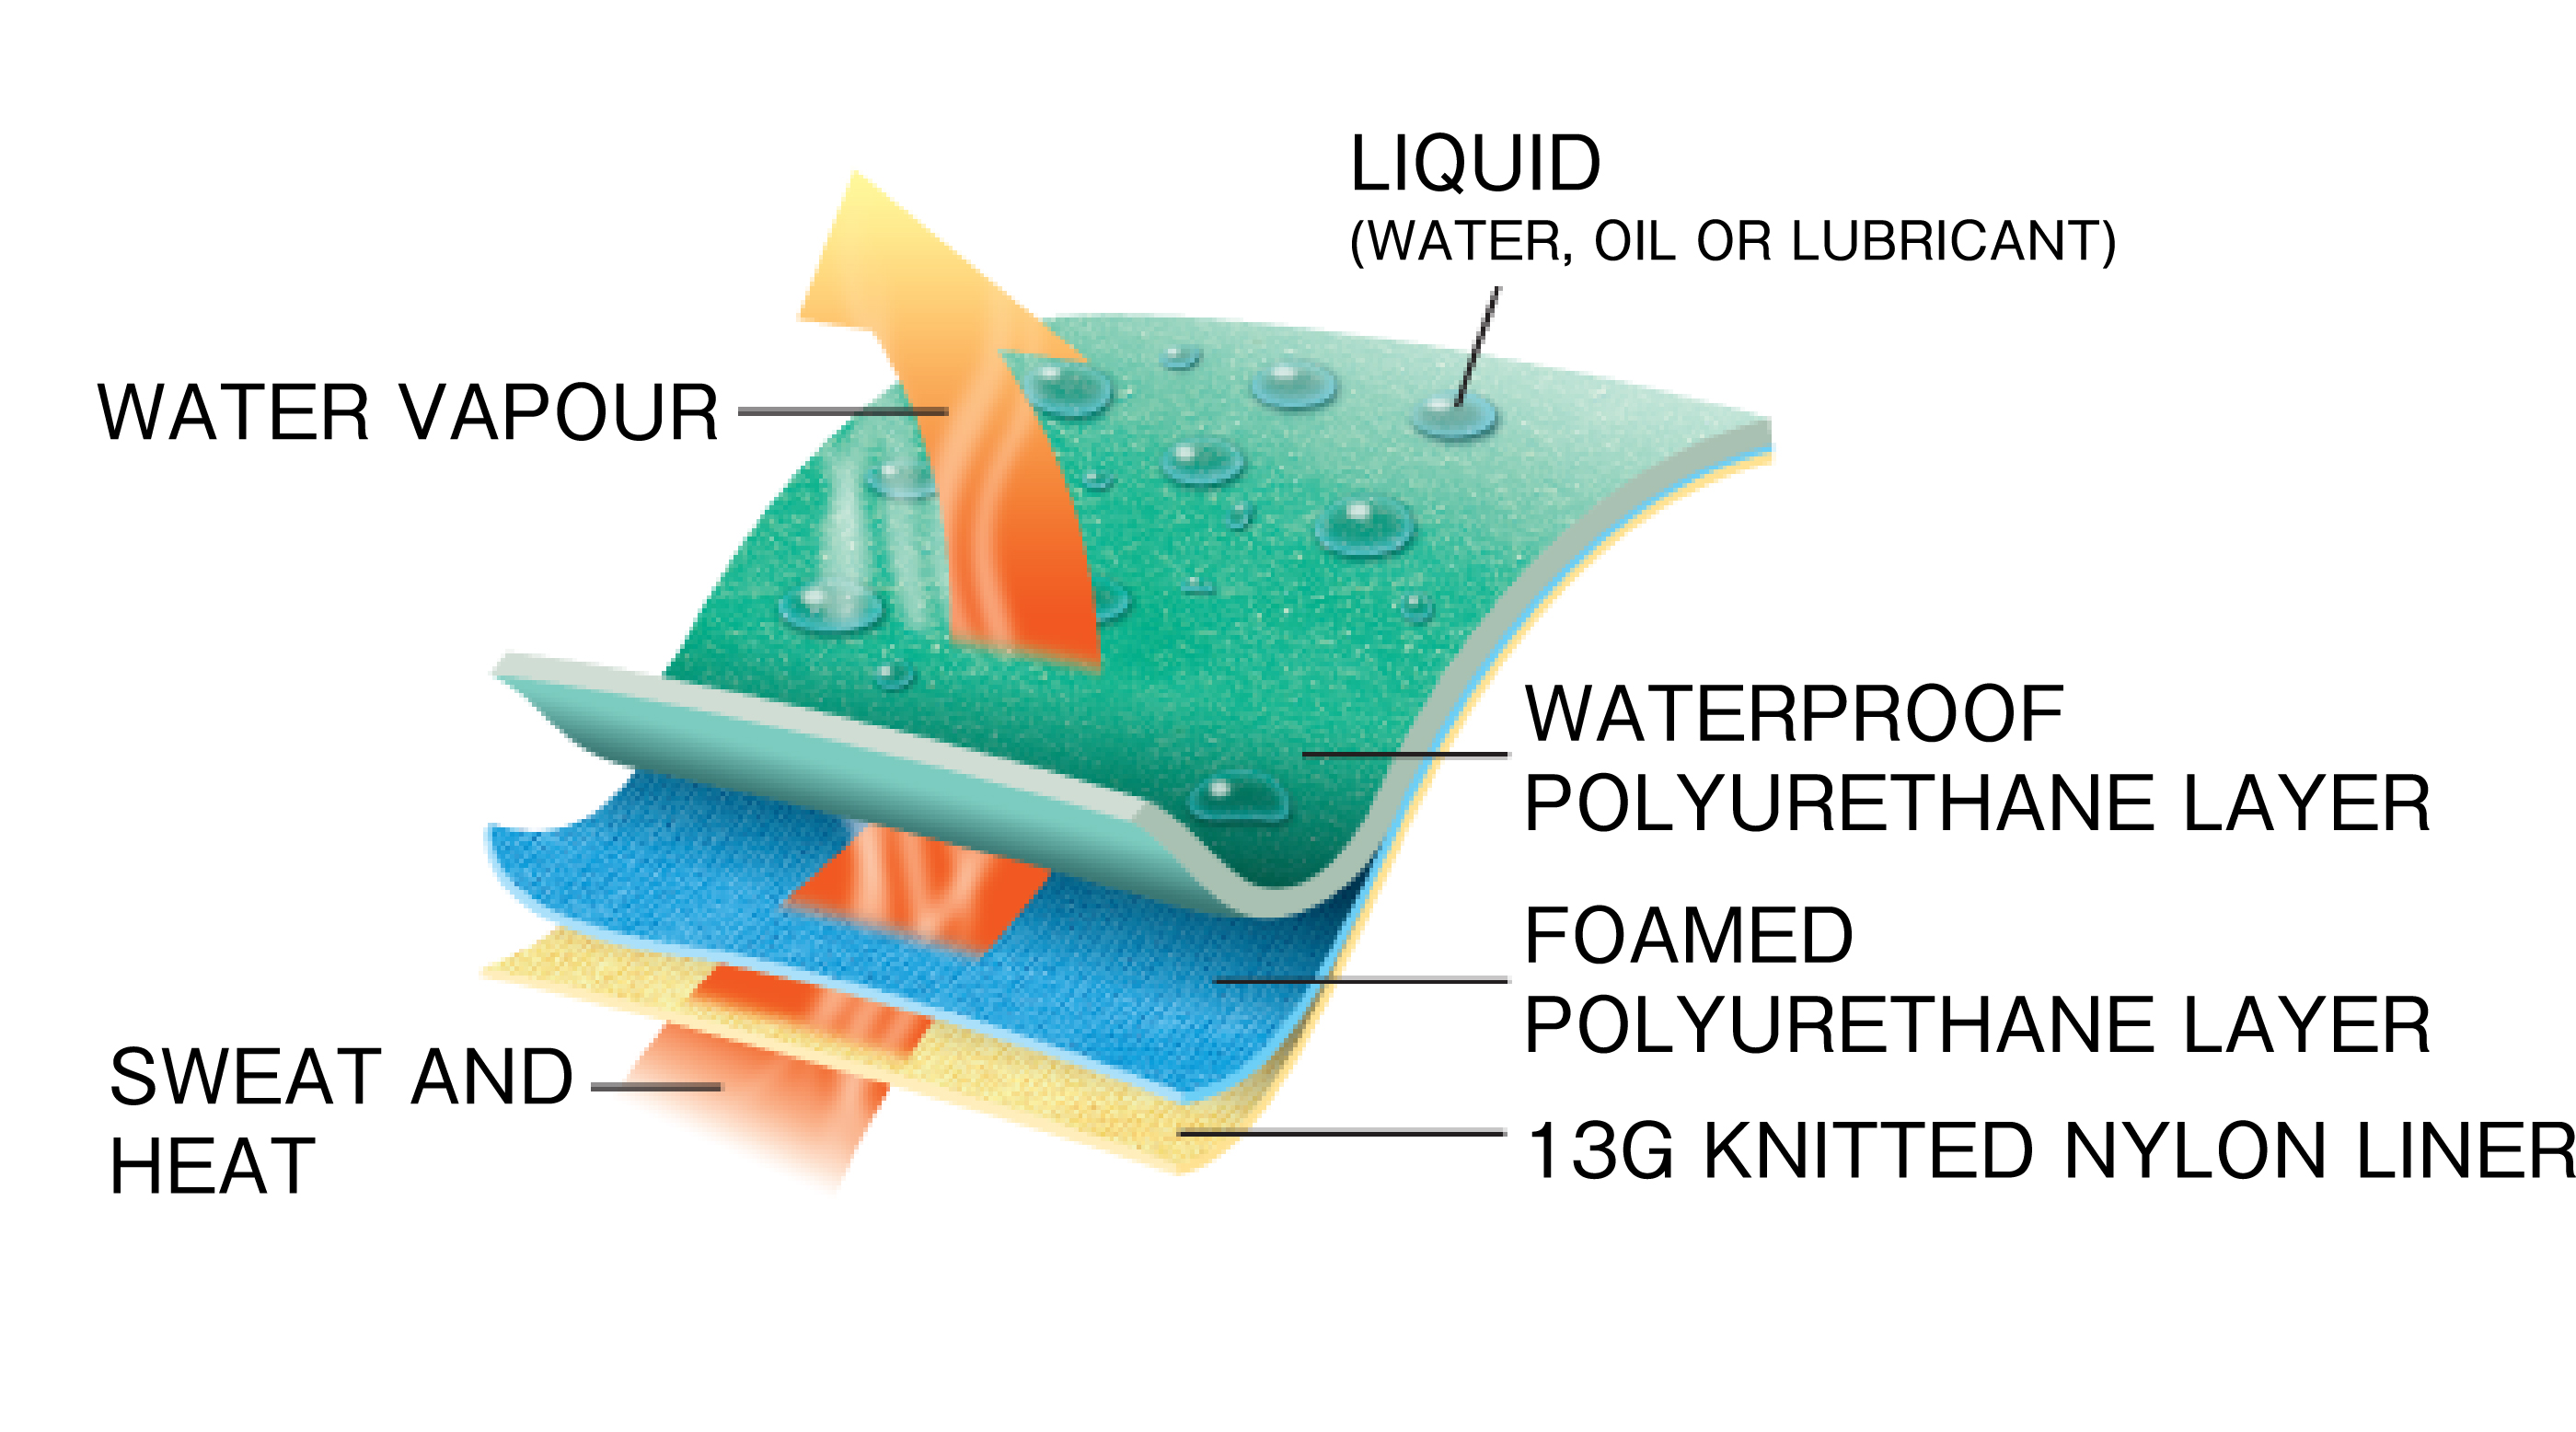 Waterpoof. Breathable membrane fixed between coating and liner. Designed thin, lightweigh, less tiring after hours of use